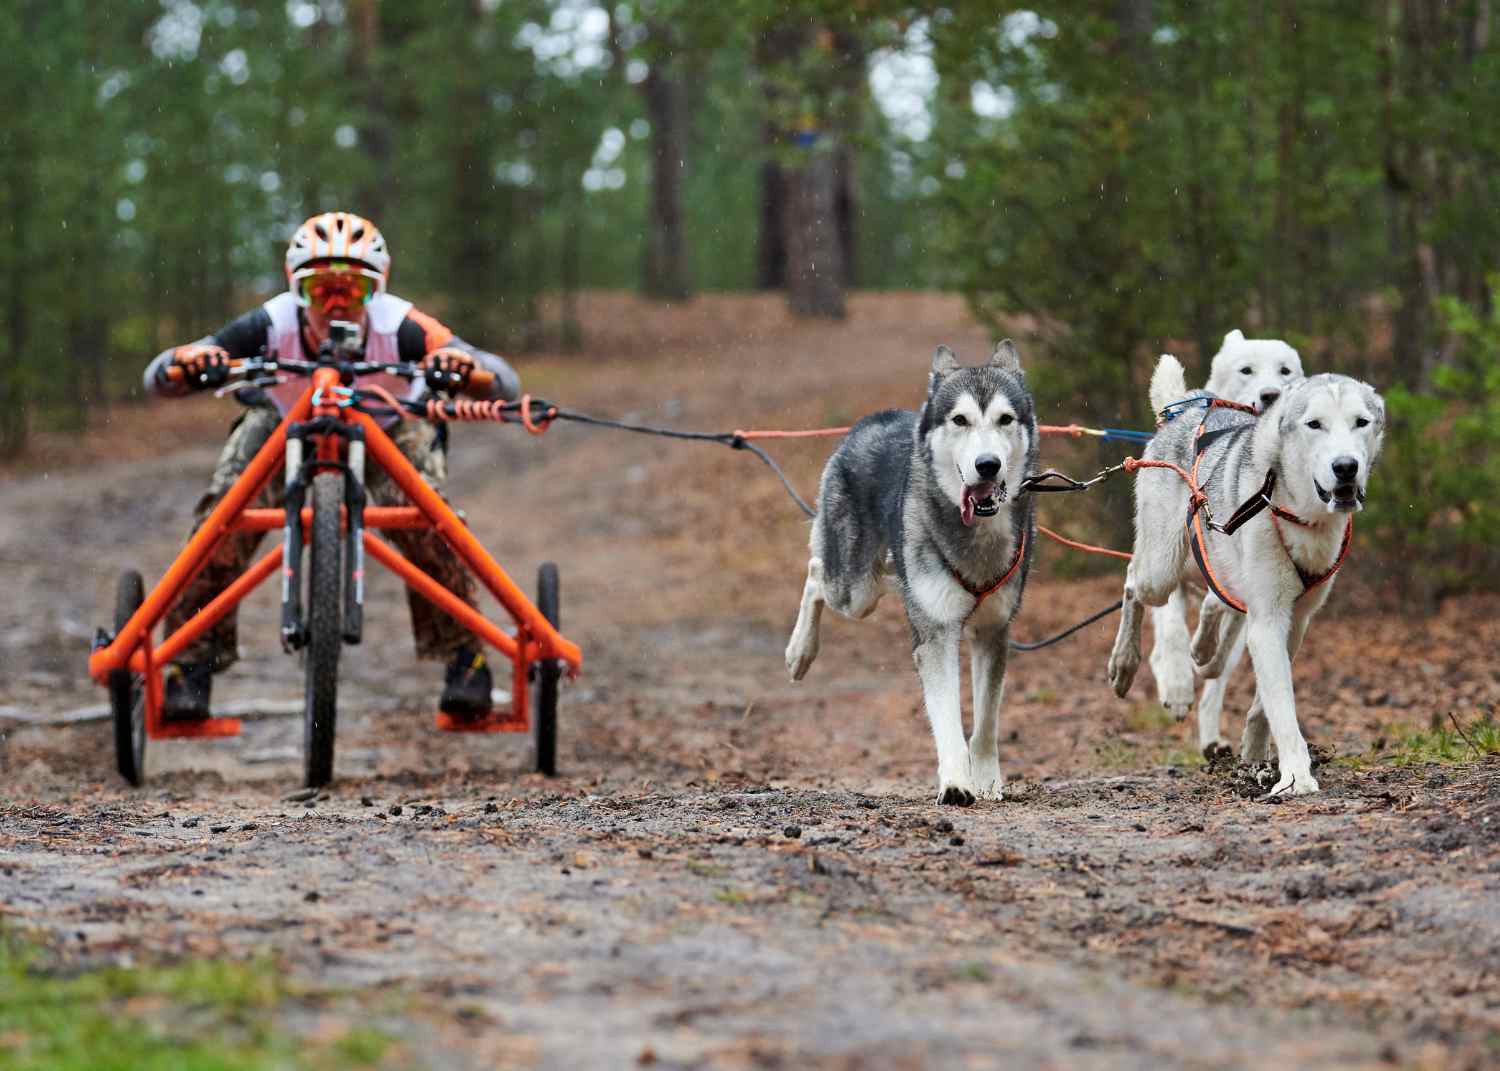 bikejoring on an orange tri-wheel with 3 dogs attached